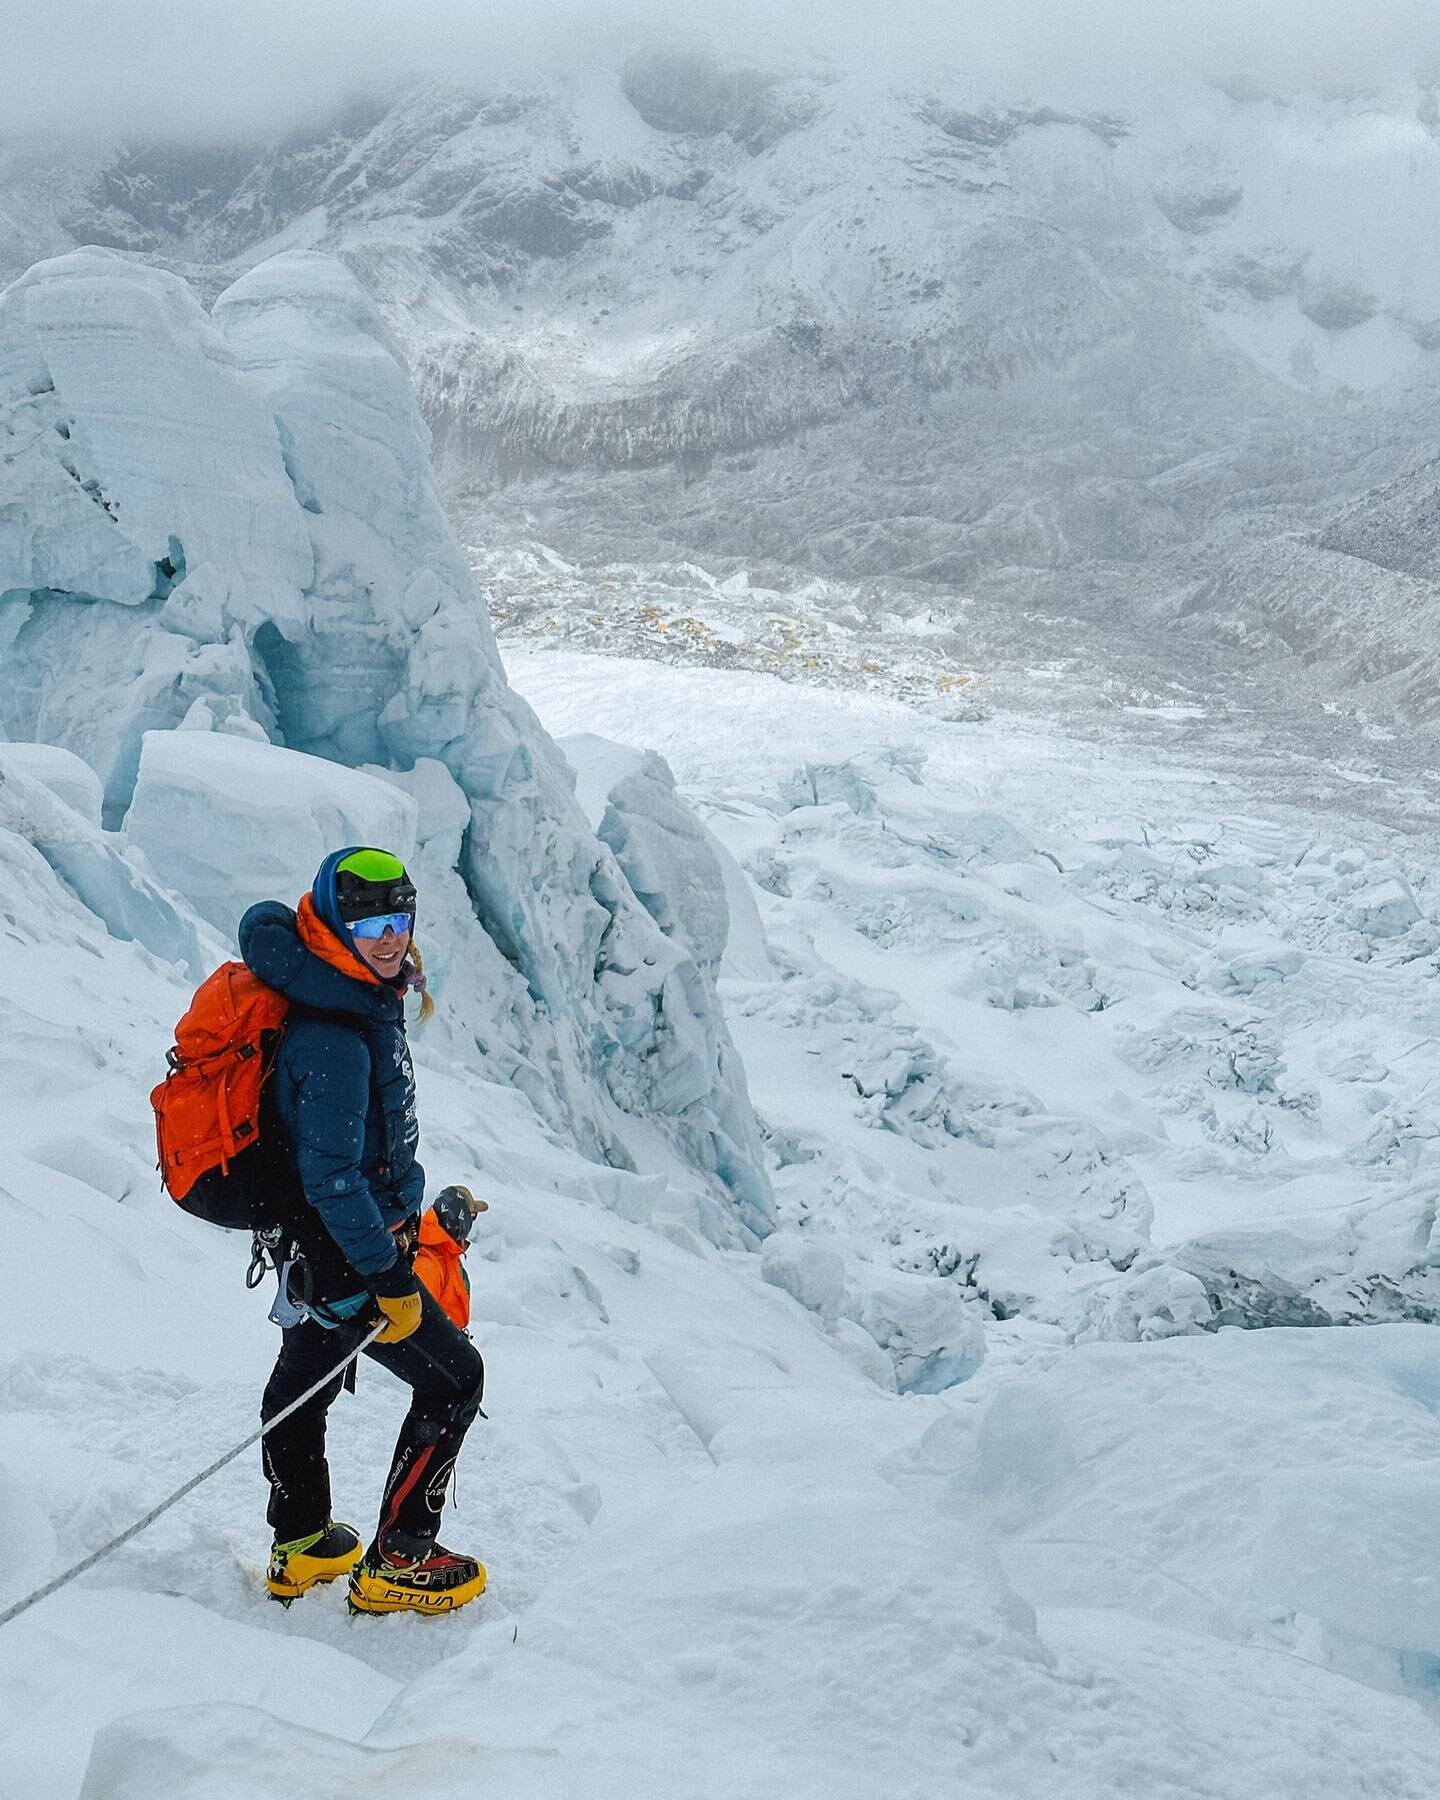 First time through the amazing and huge Khumbu Icefall. These dimensions are insane and this place offers so much good and bad. 

This climb was our pre-rotation. Meaning, we wanted to climb up to touch Camp 1 plateau, and then down to EBC again on o